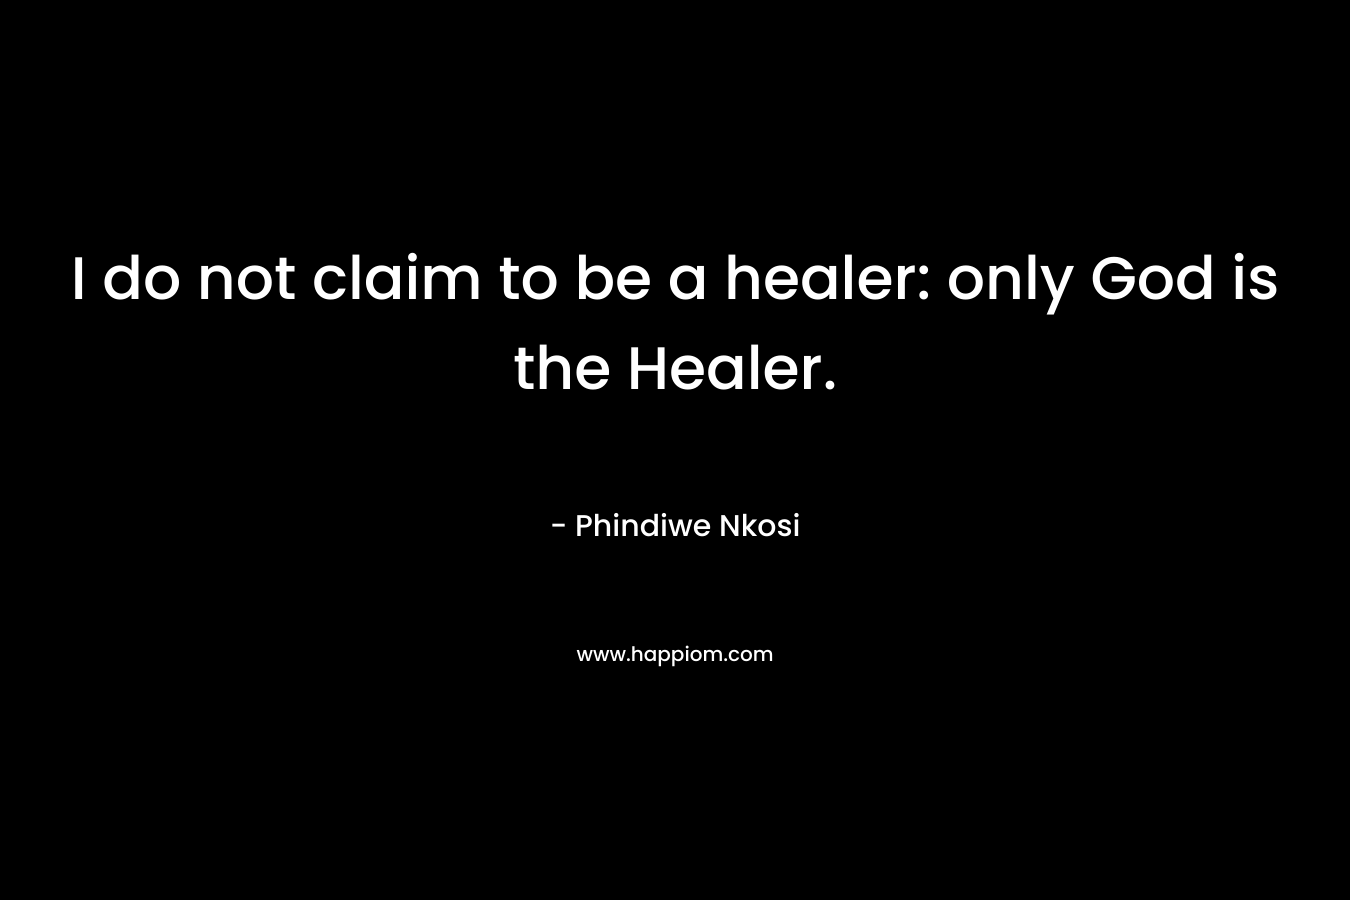 I do not claim to be a healer: only God is the Healer. – Phindiwe Nkosi